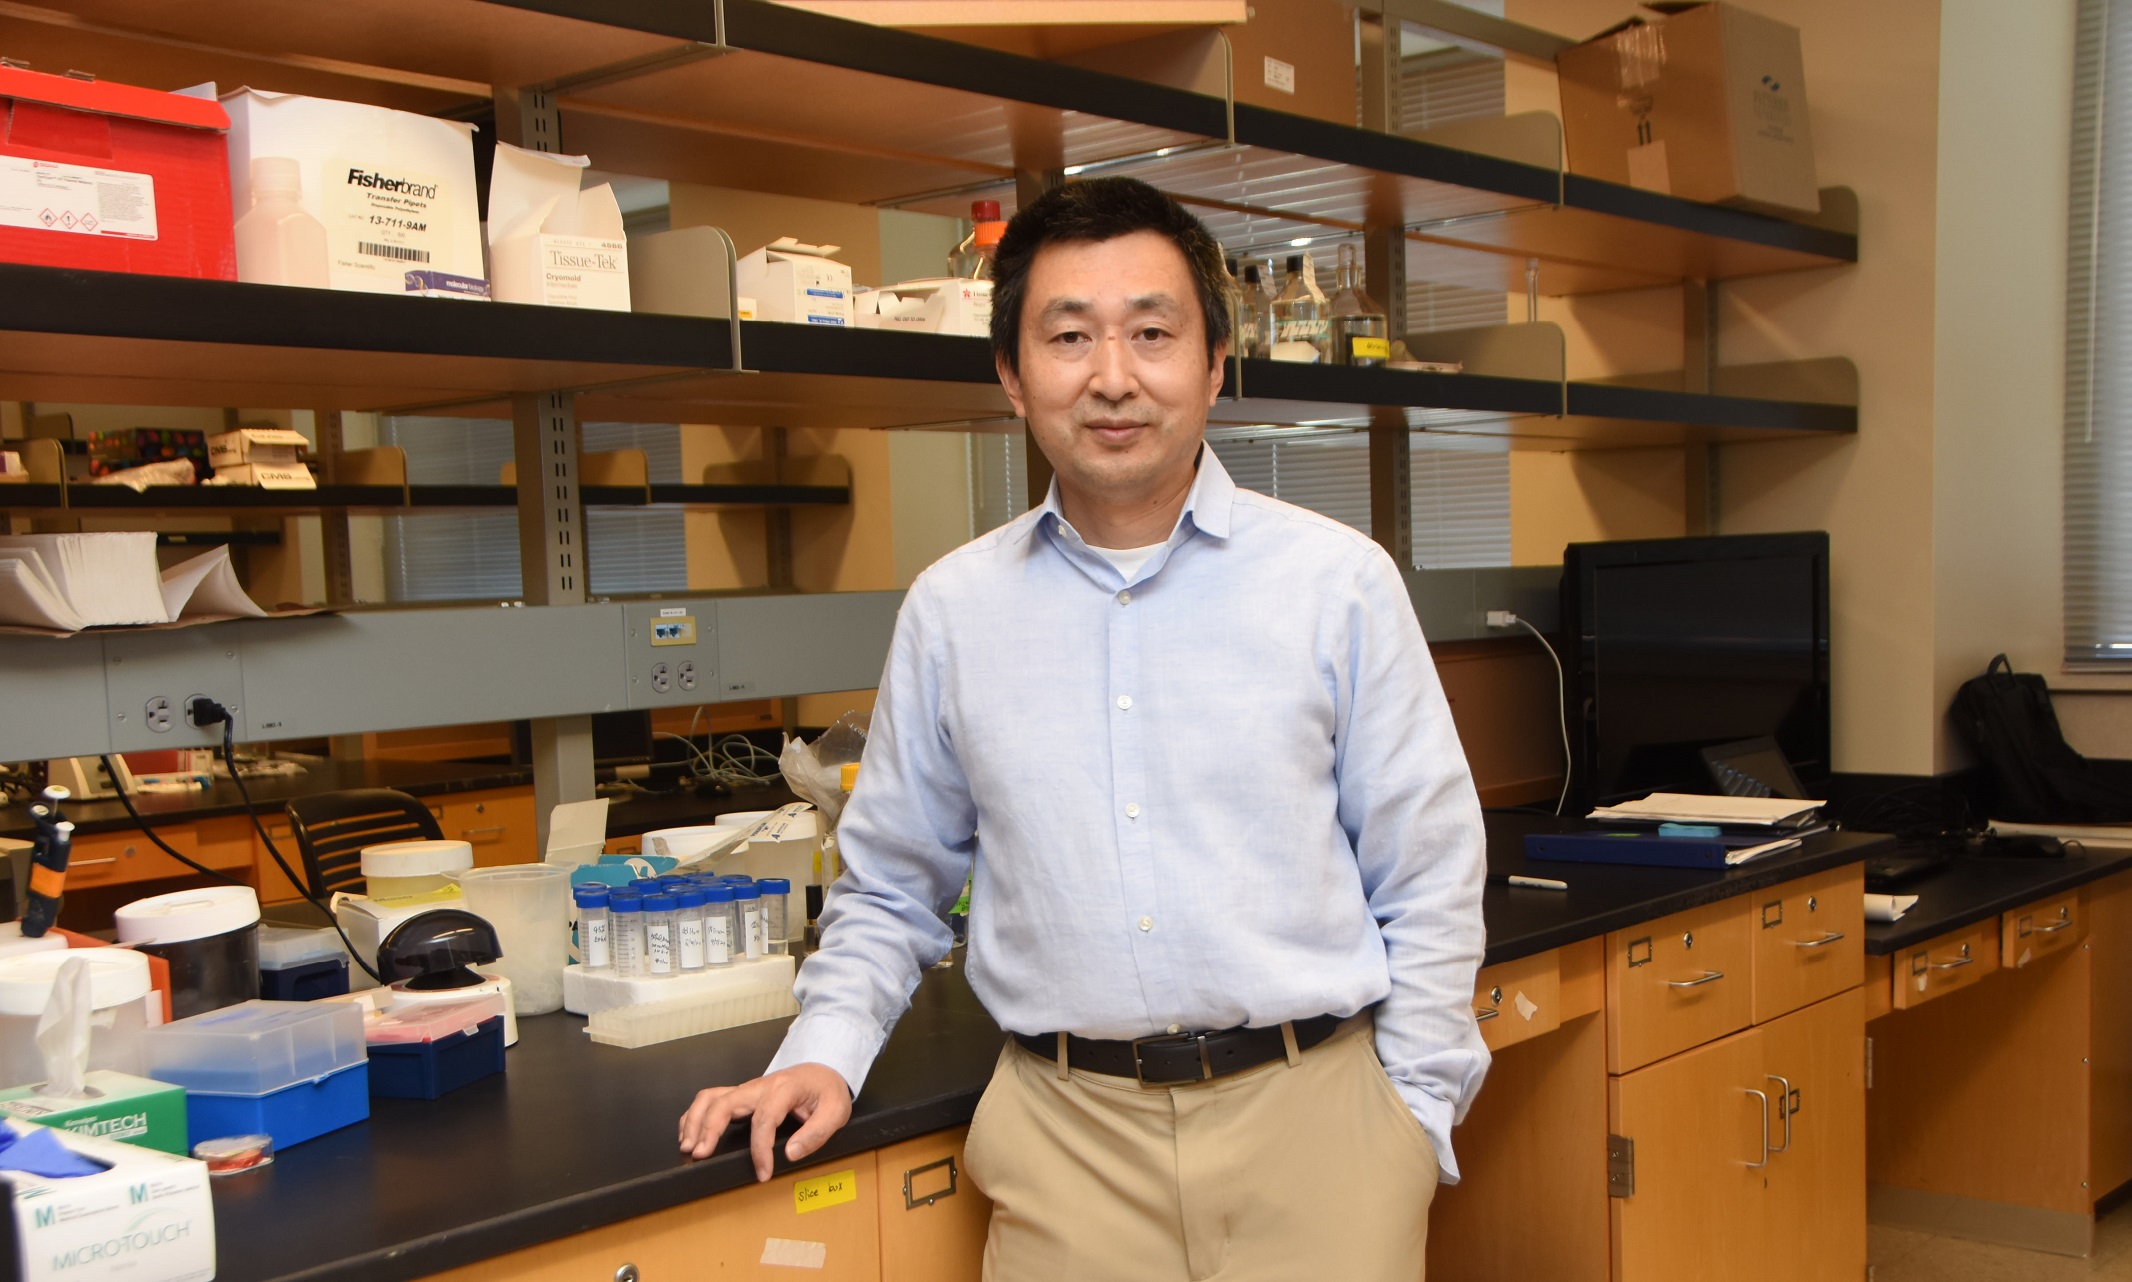 Xiangming Zha stands in his lab and smiles at the camera while leaning against a counter filled with equipment.